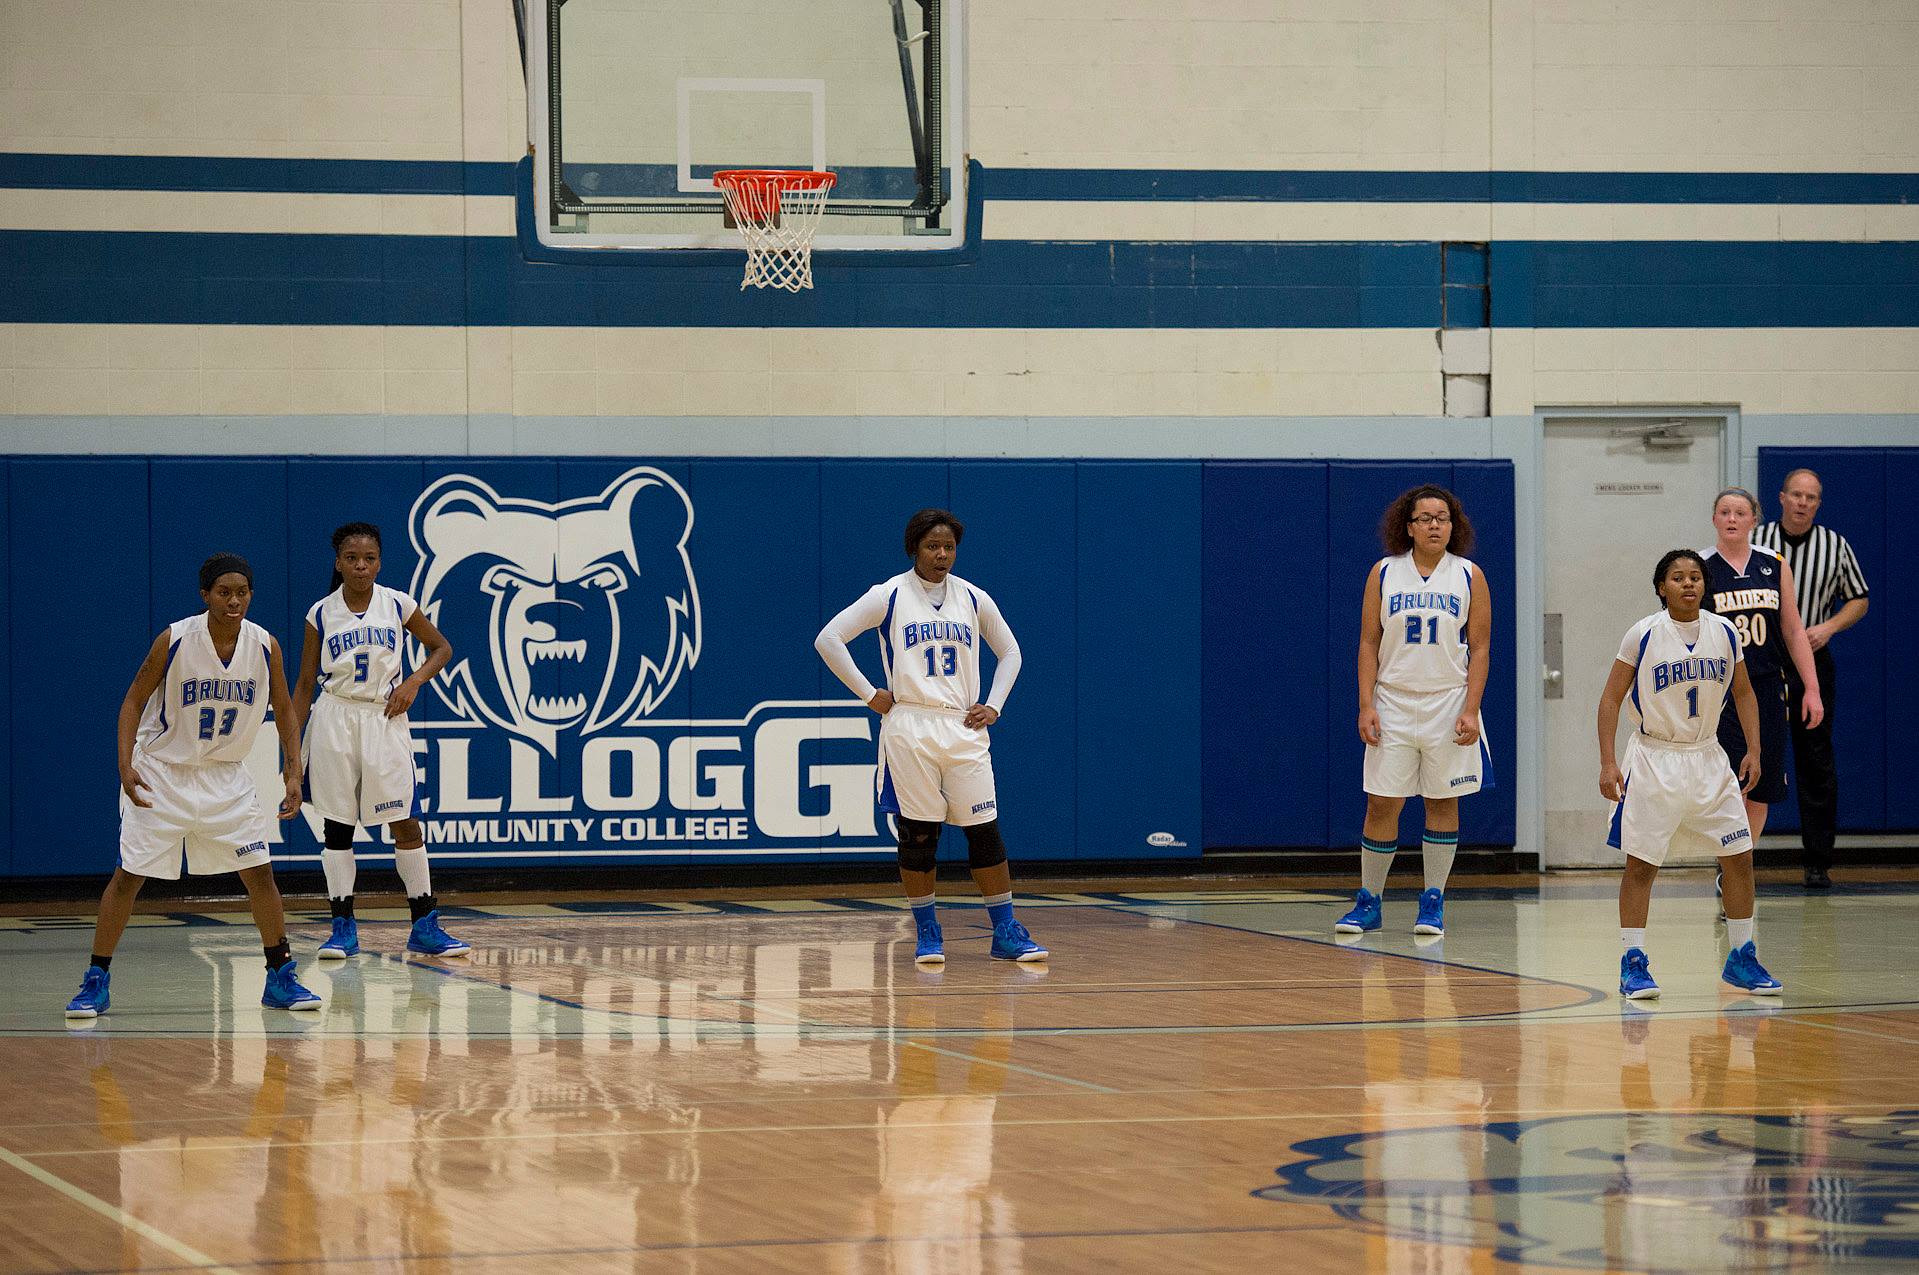 Women's basketball players on court during a game.